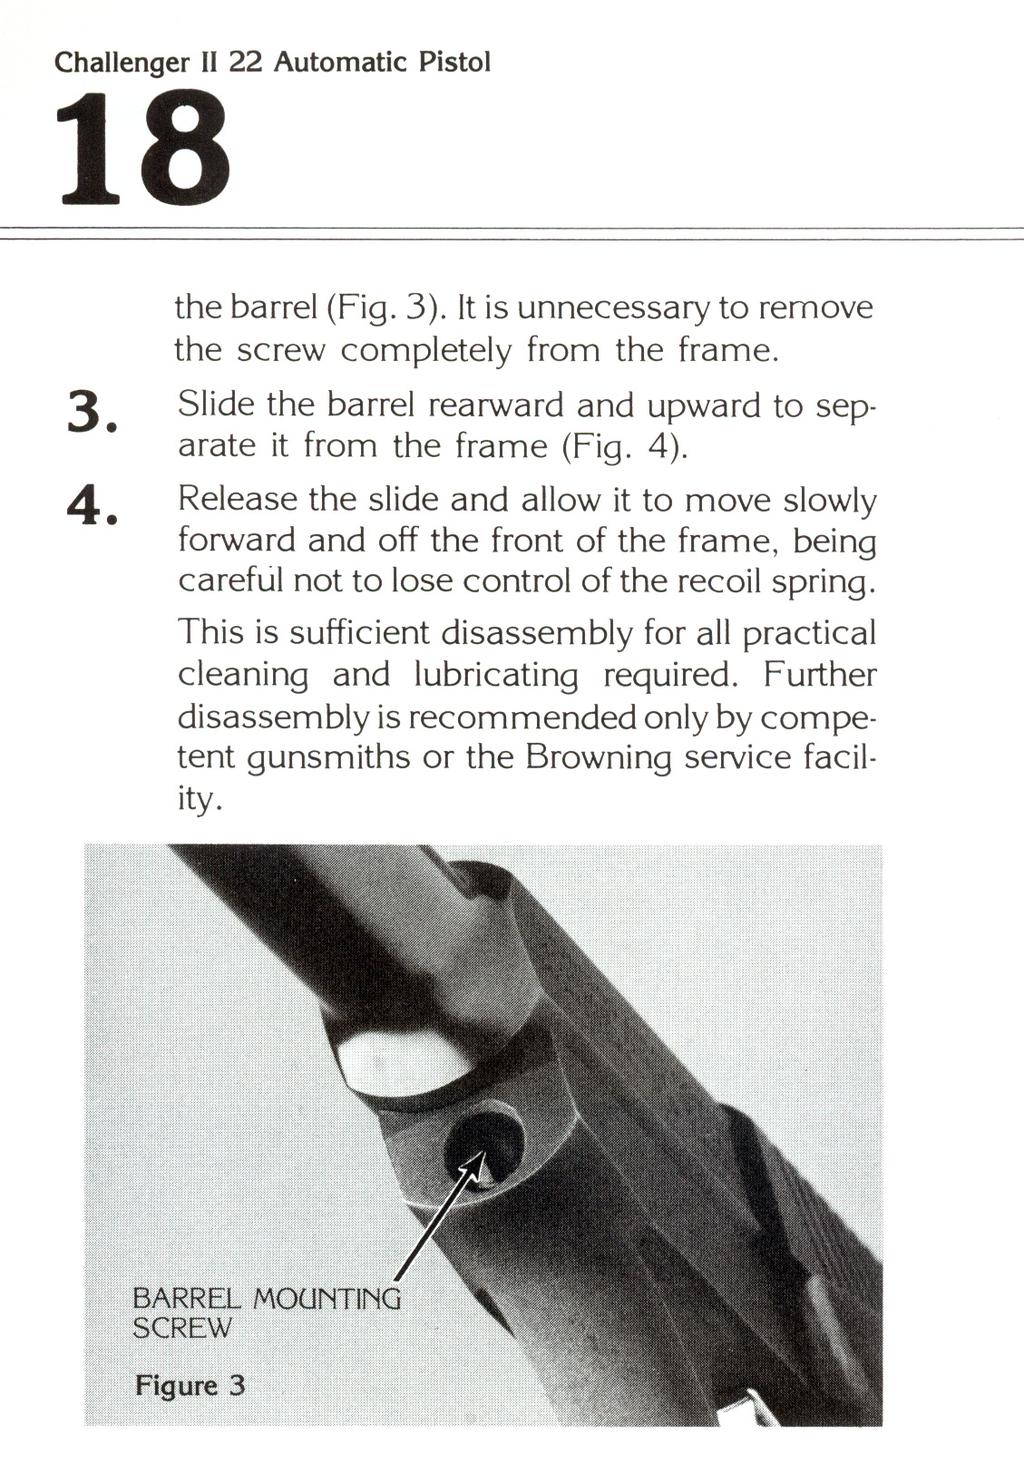 the barrel (Fig. 3 ).It is unnecessary to remove the screw completely from the frame. 3. 4. Slide the barrel rearward and upward to separate it from the frame (Fig. 4).